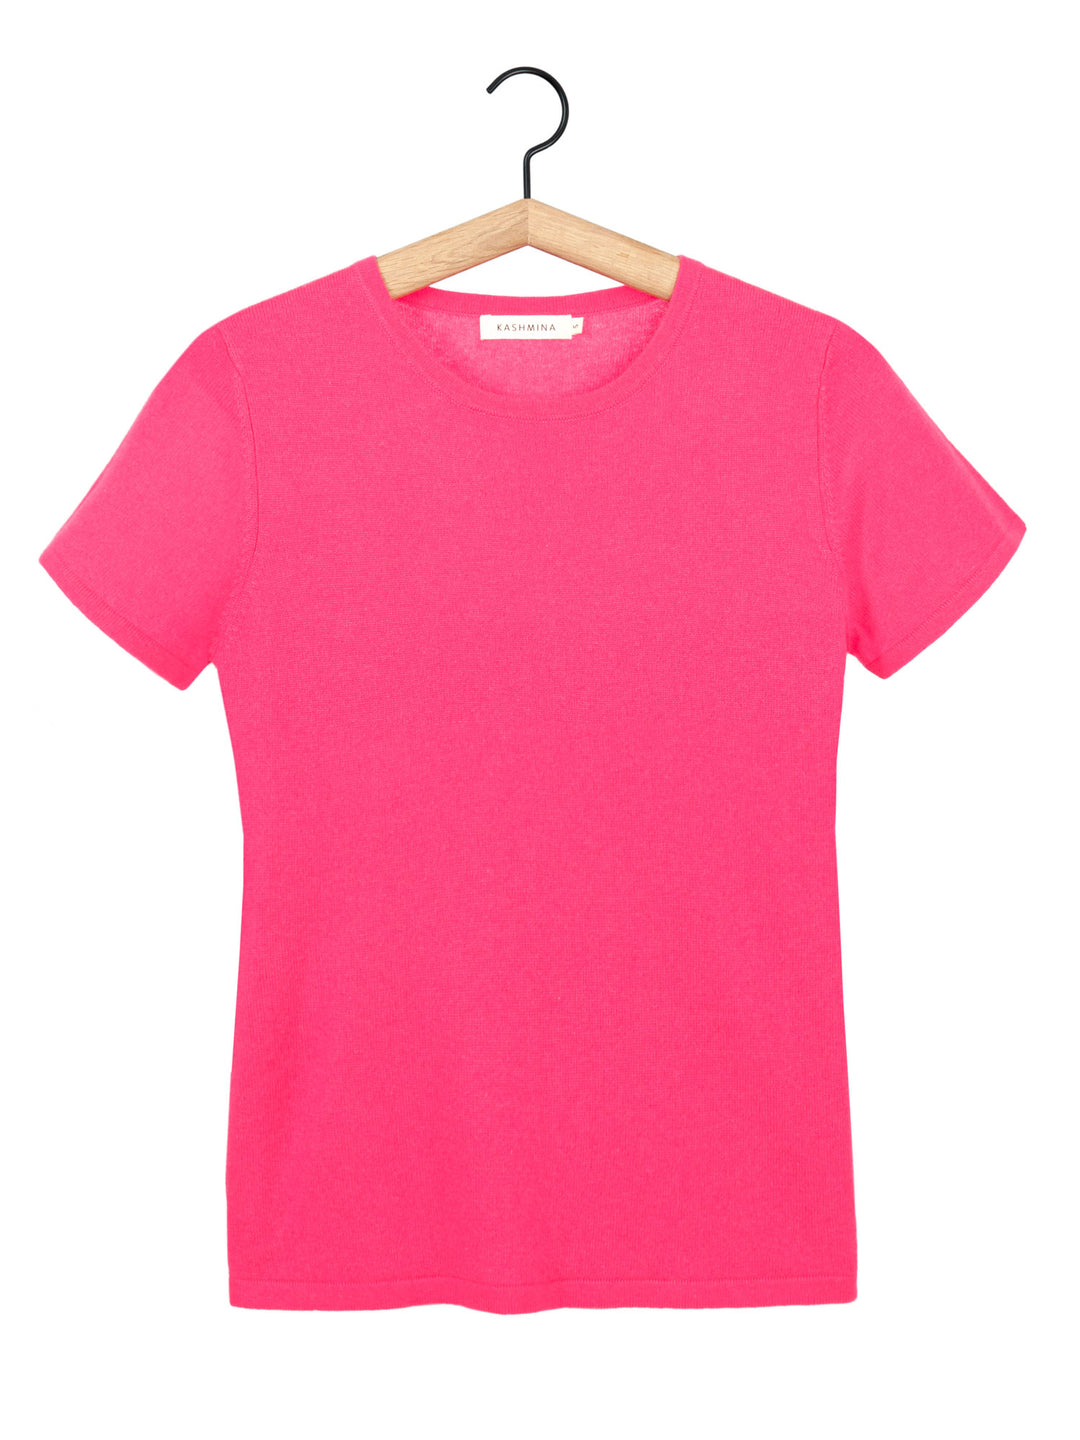 cashmere t-shirt in 100% cashmere by Kashmina